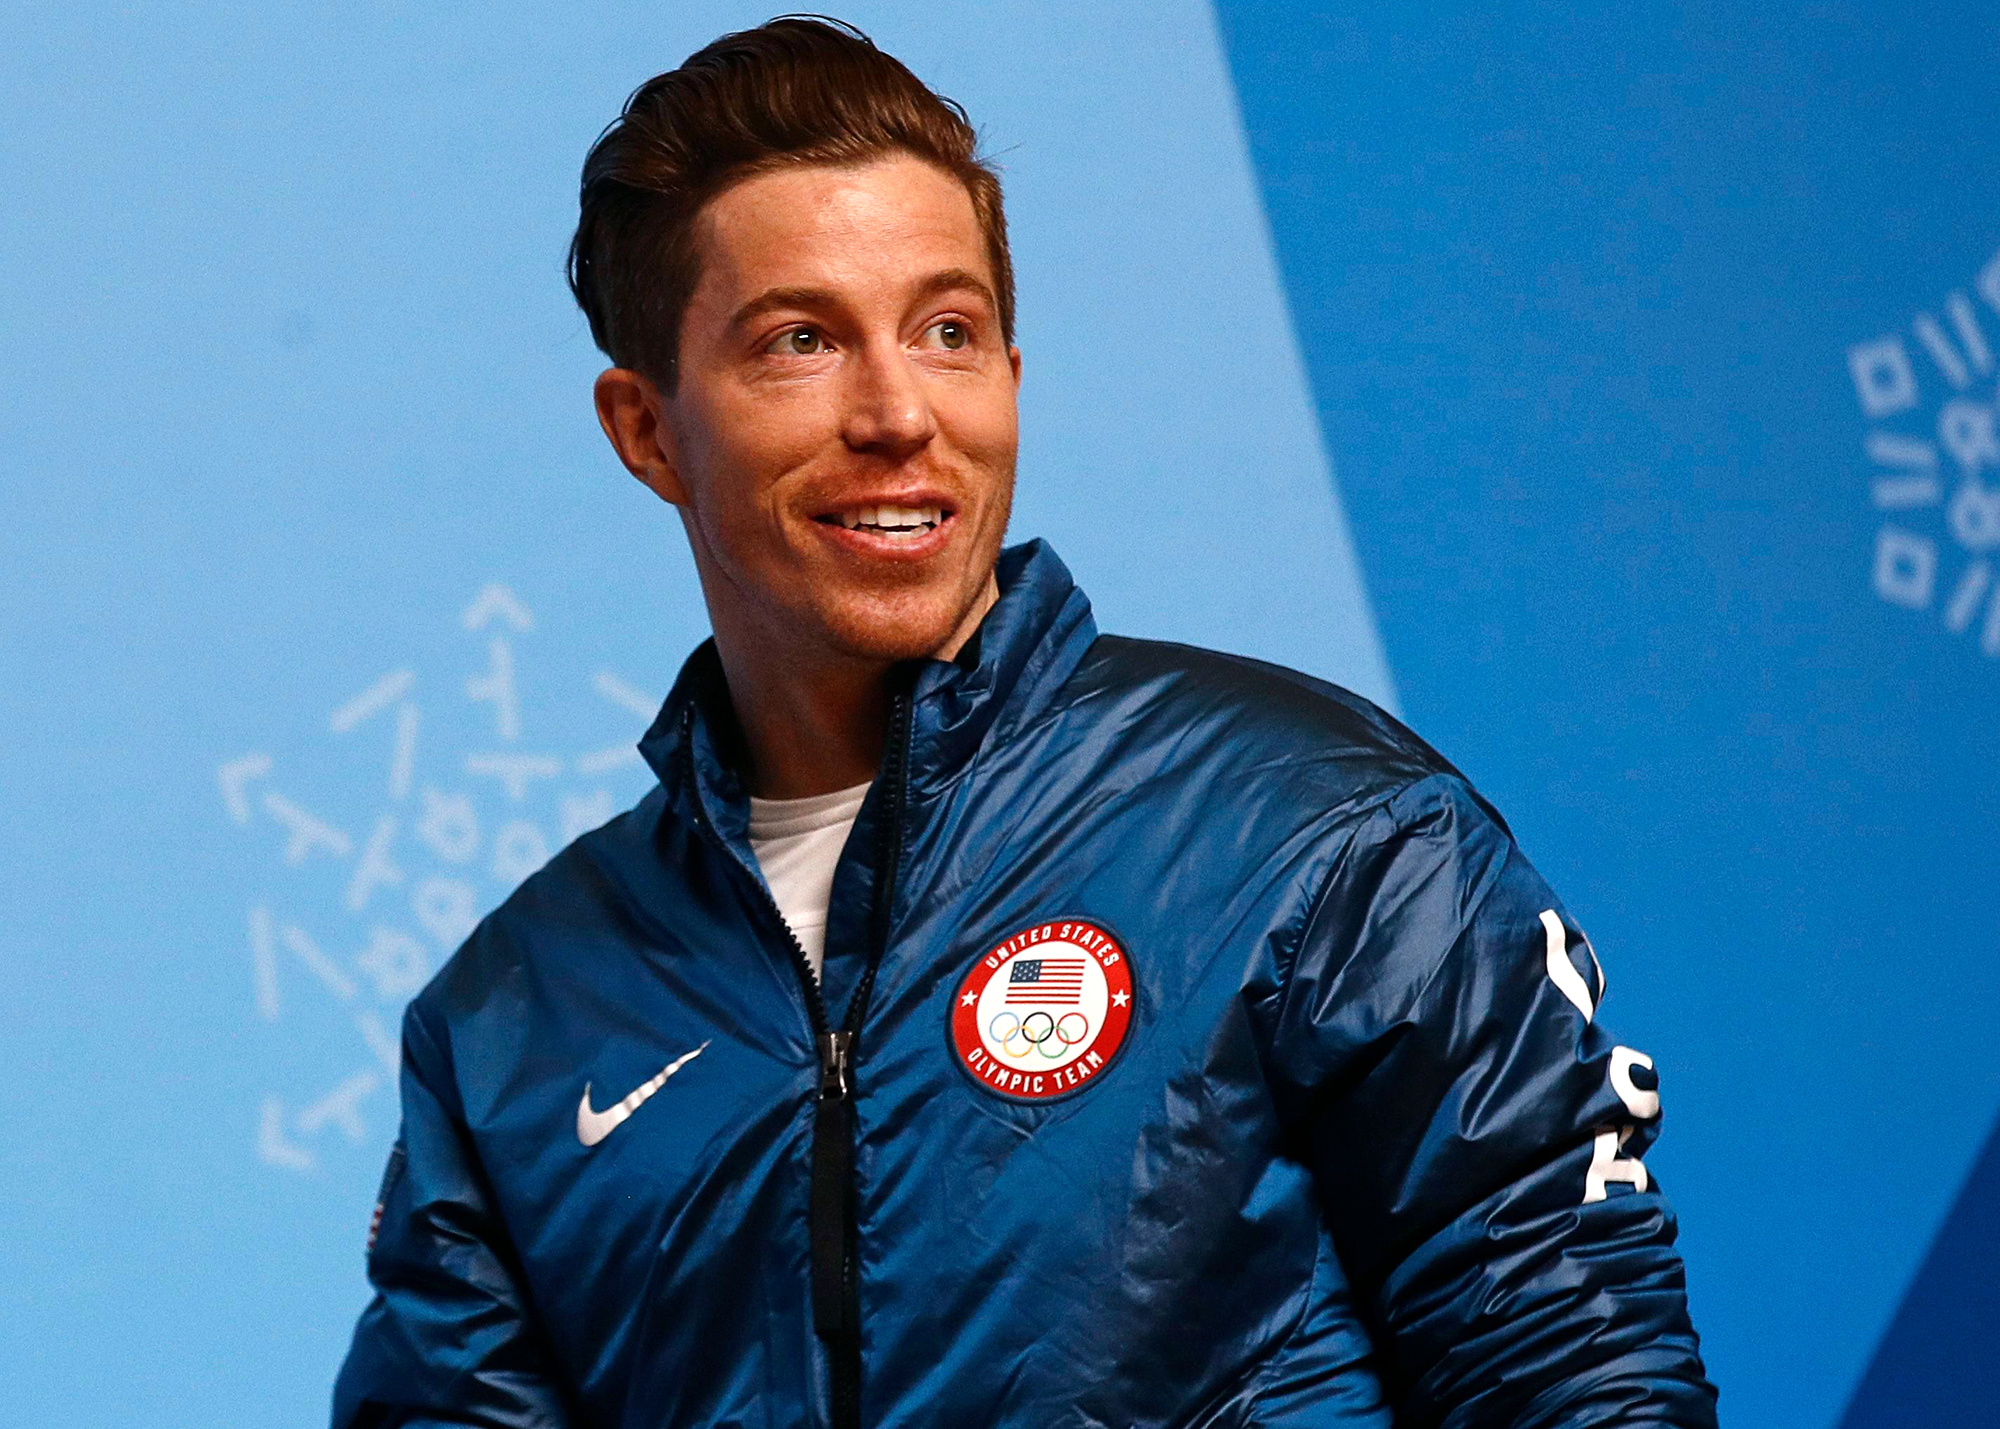 Olympics 2022 -- At his fifth Games, Shaun White is still